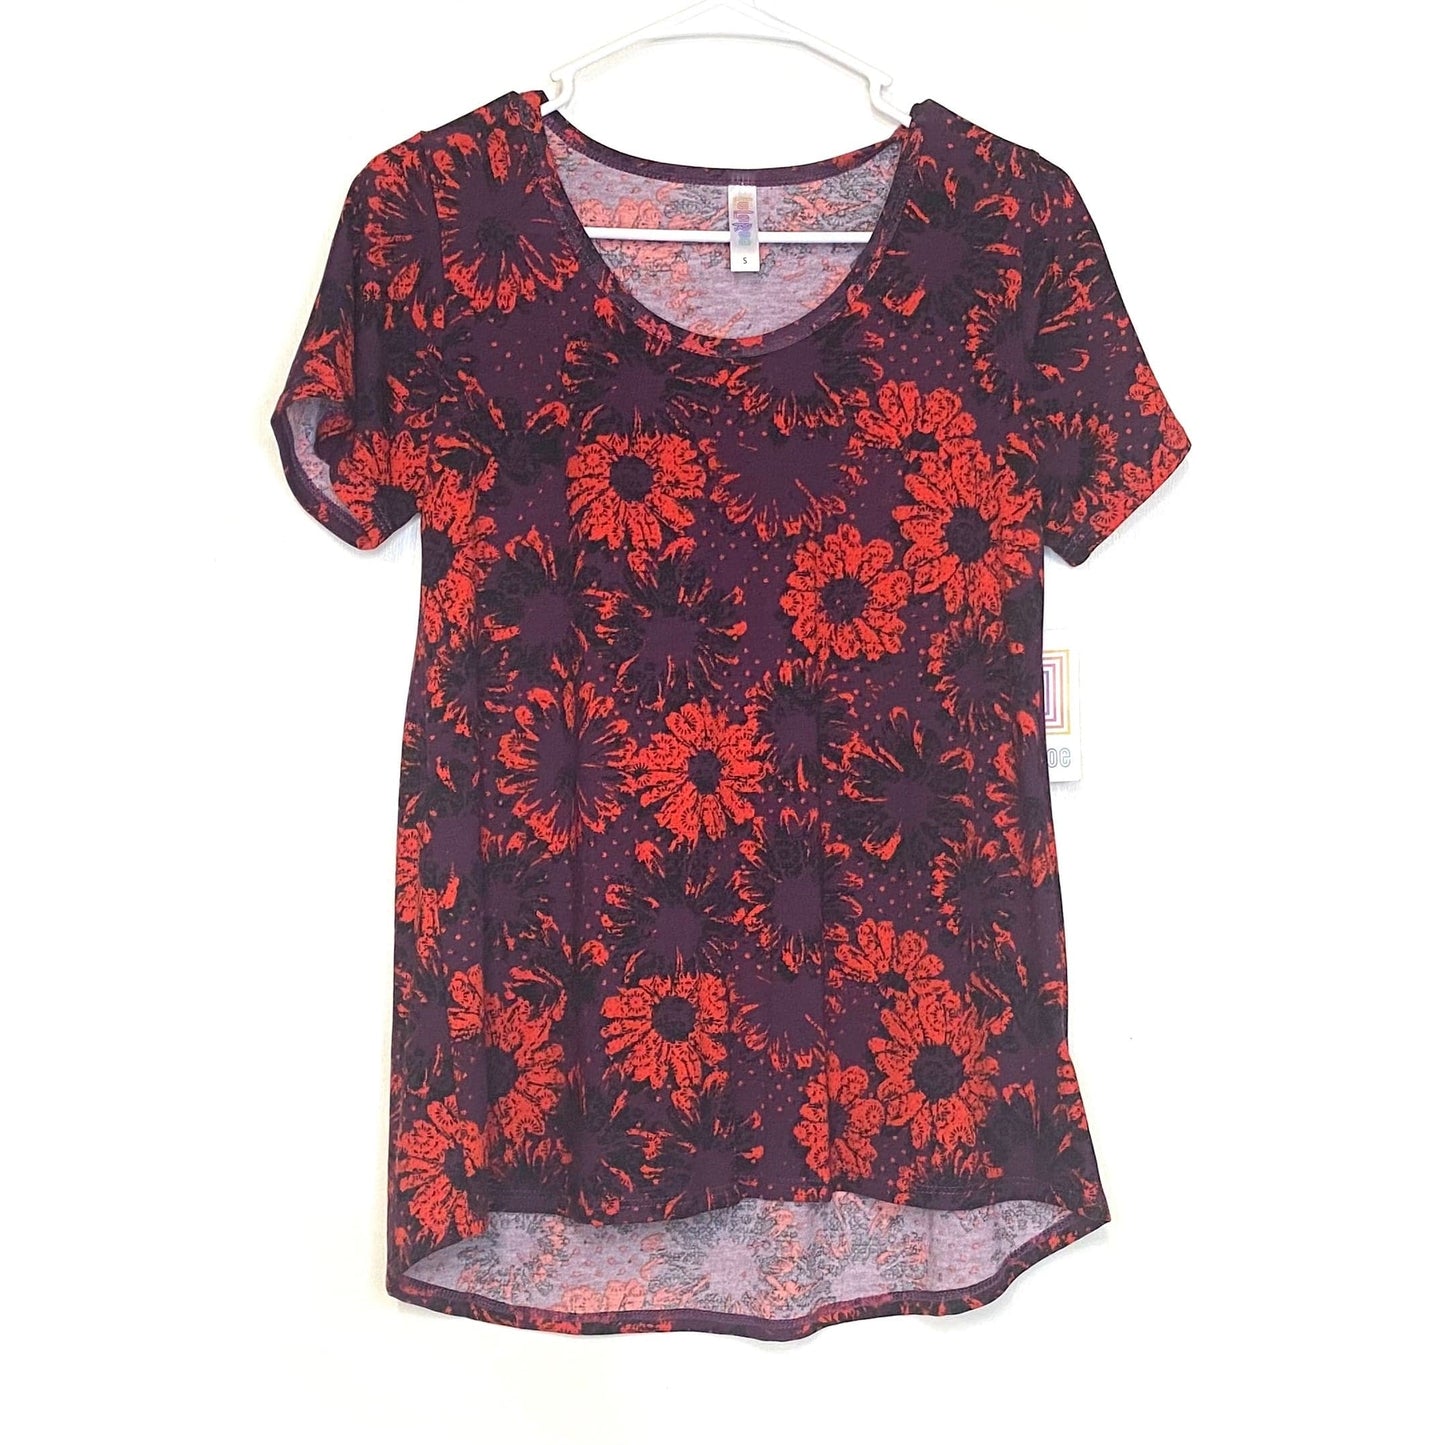 LuLaRoe Womens S Purple/Red Classic T Floral T-Shirt S/s NWT